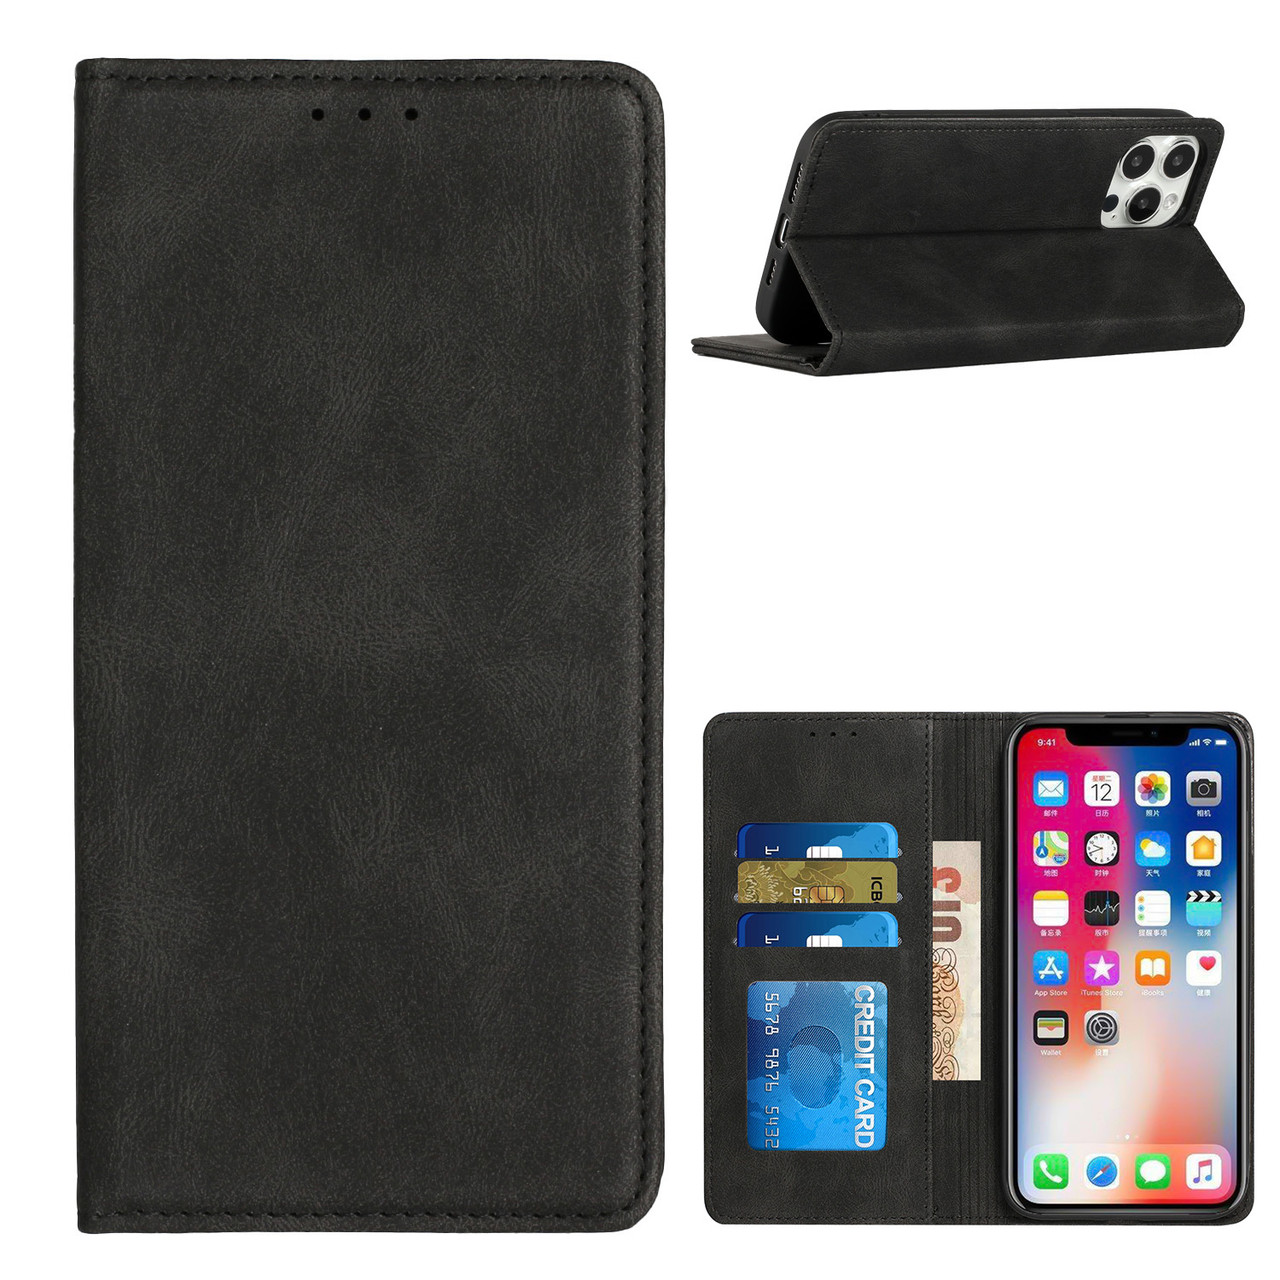 The Best iPhone XS Max Wallet Cases and Covers